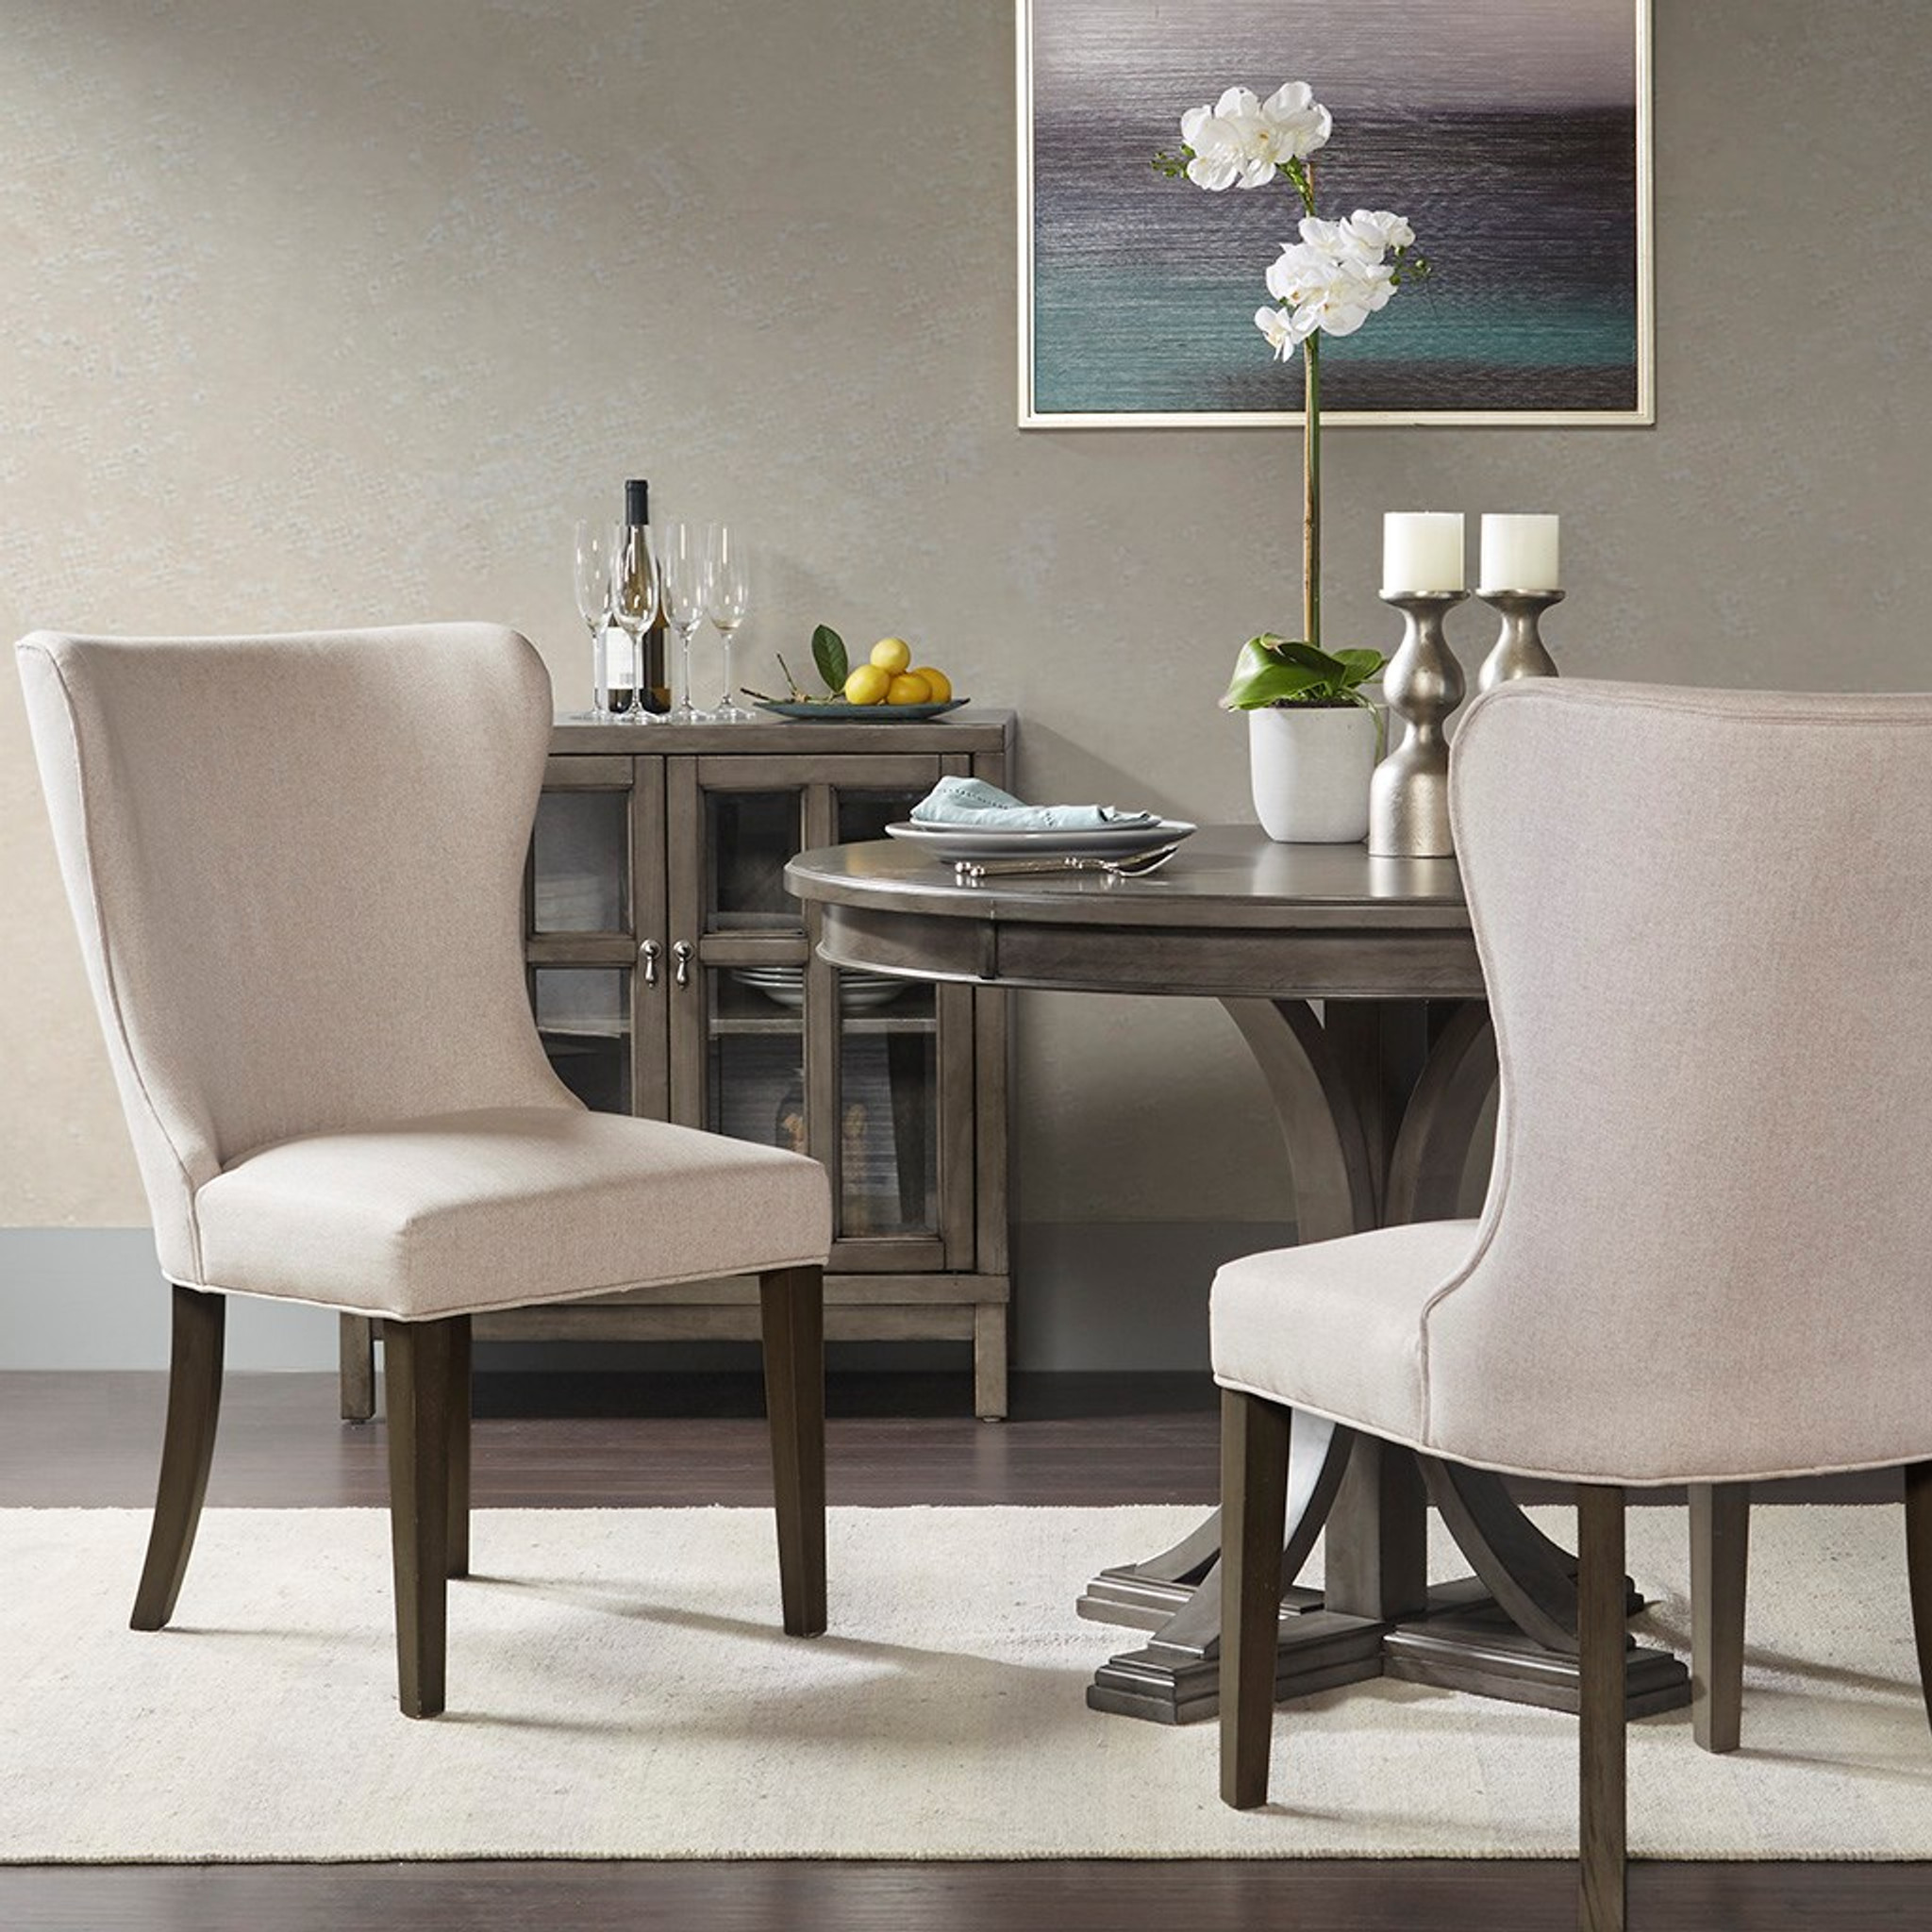 Dining Chair Roy S Furniture Chicago Home Decor